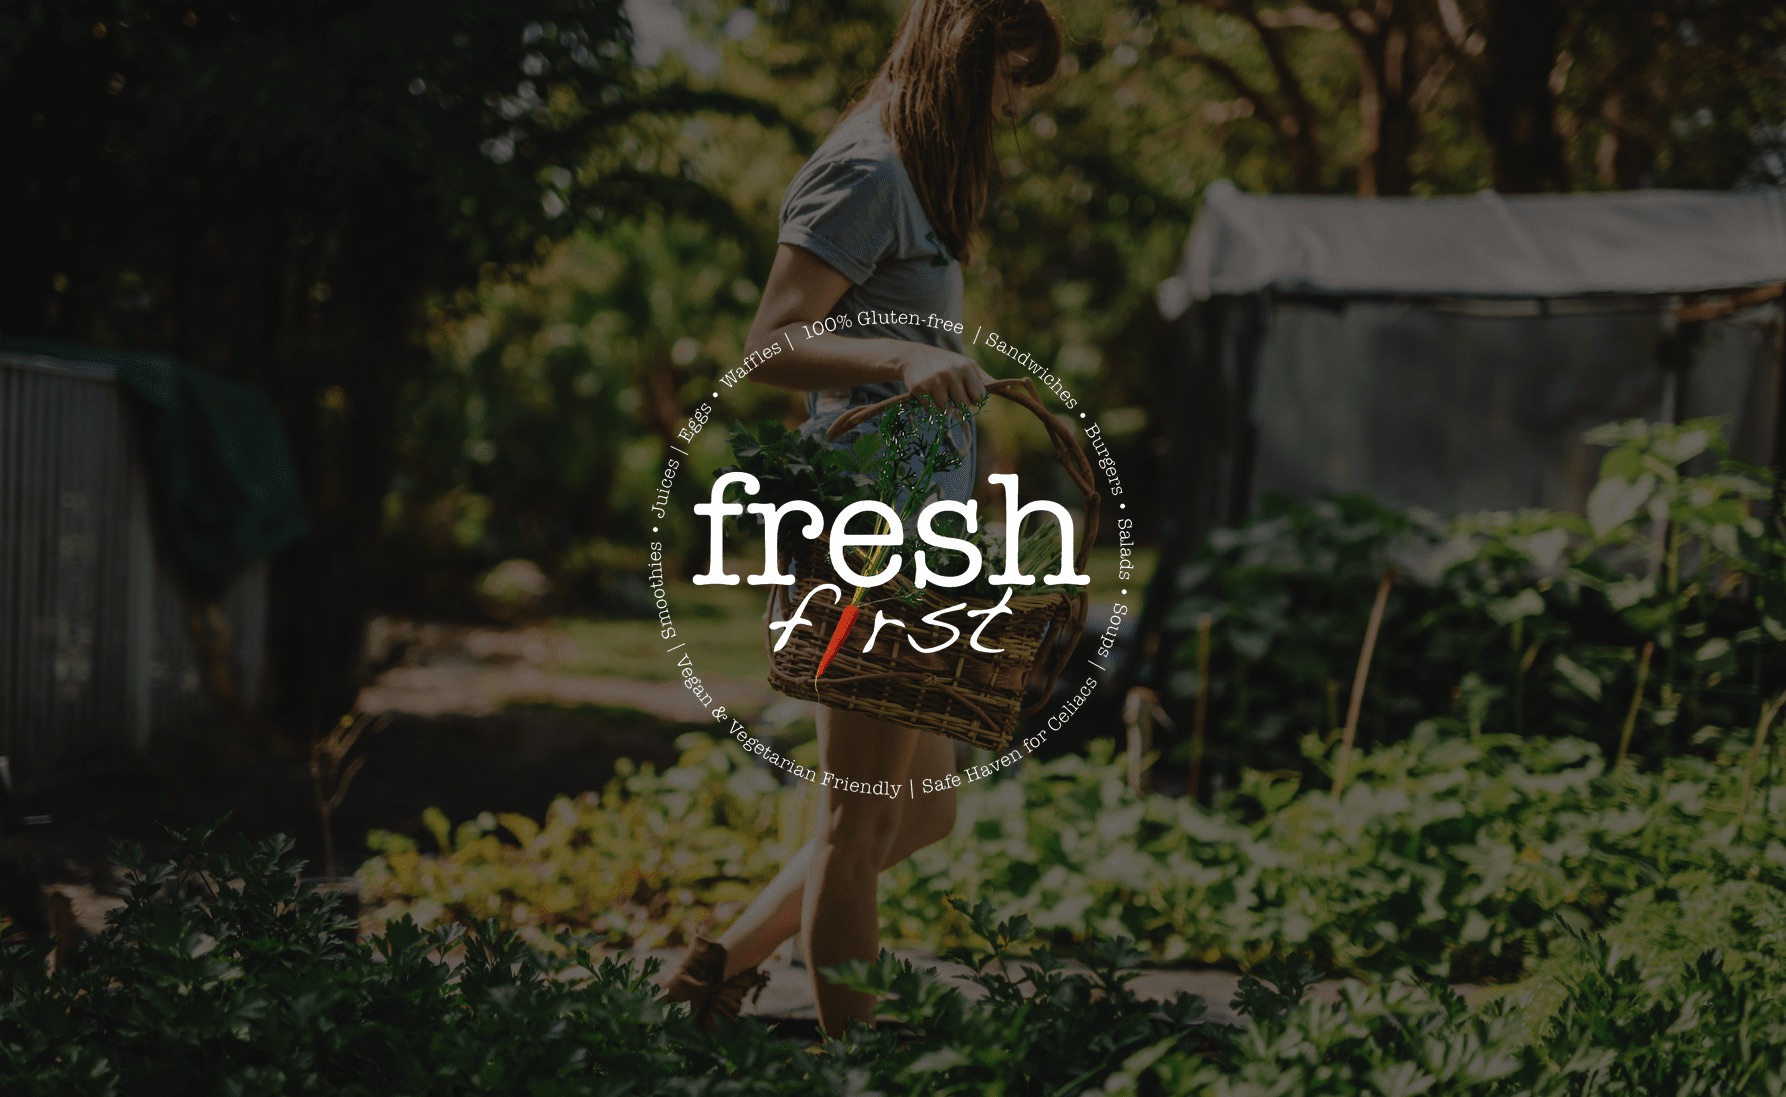 White Fresh First logo with a woman tending to a garden in the background carrying a basket of produce